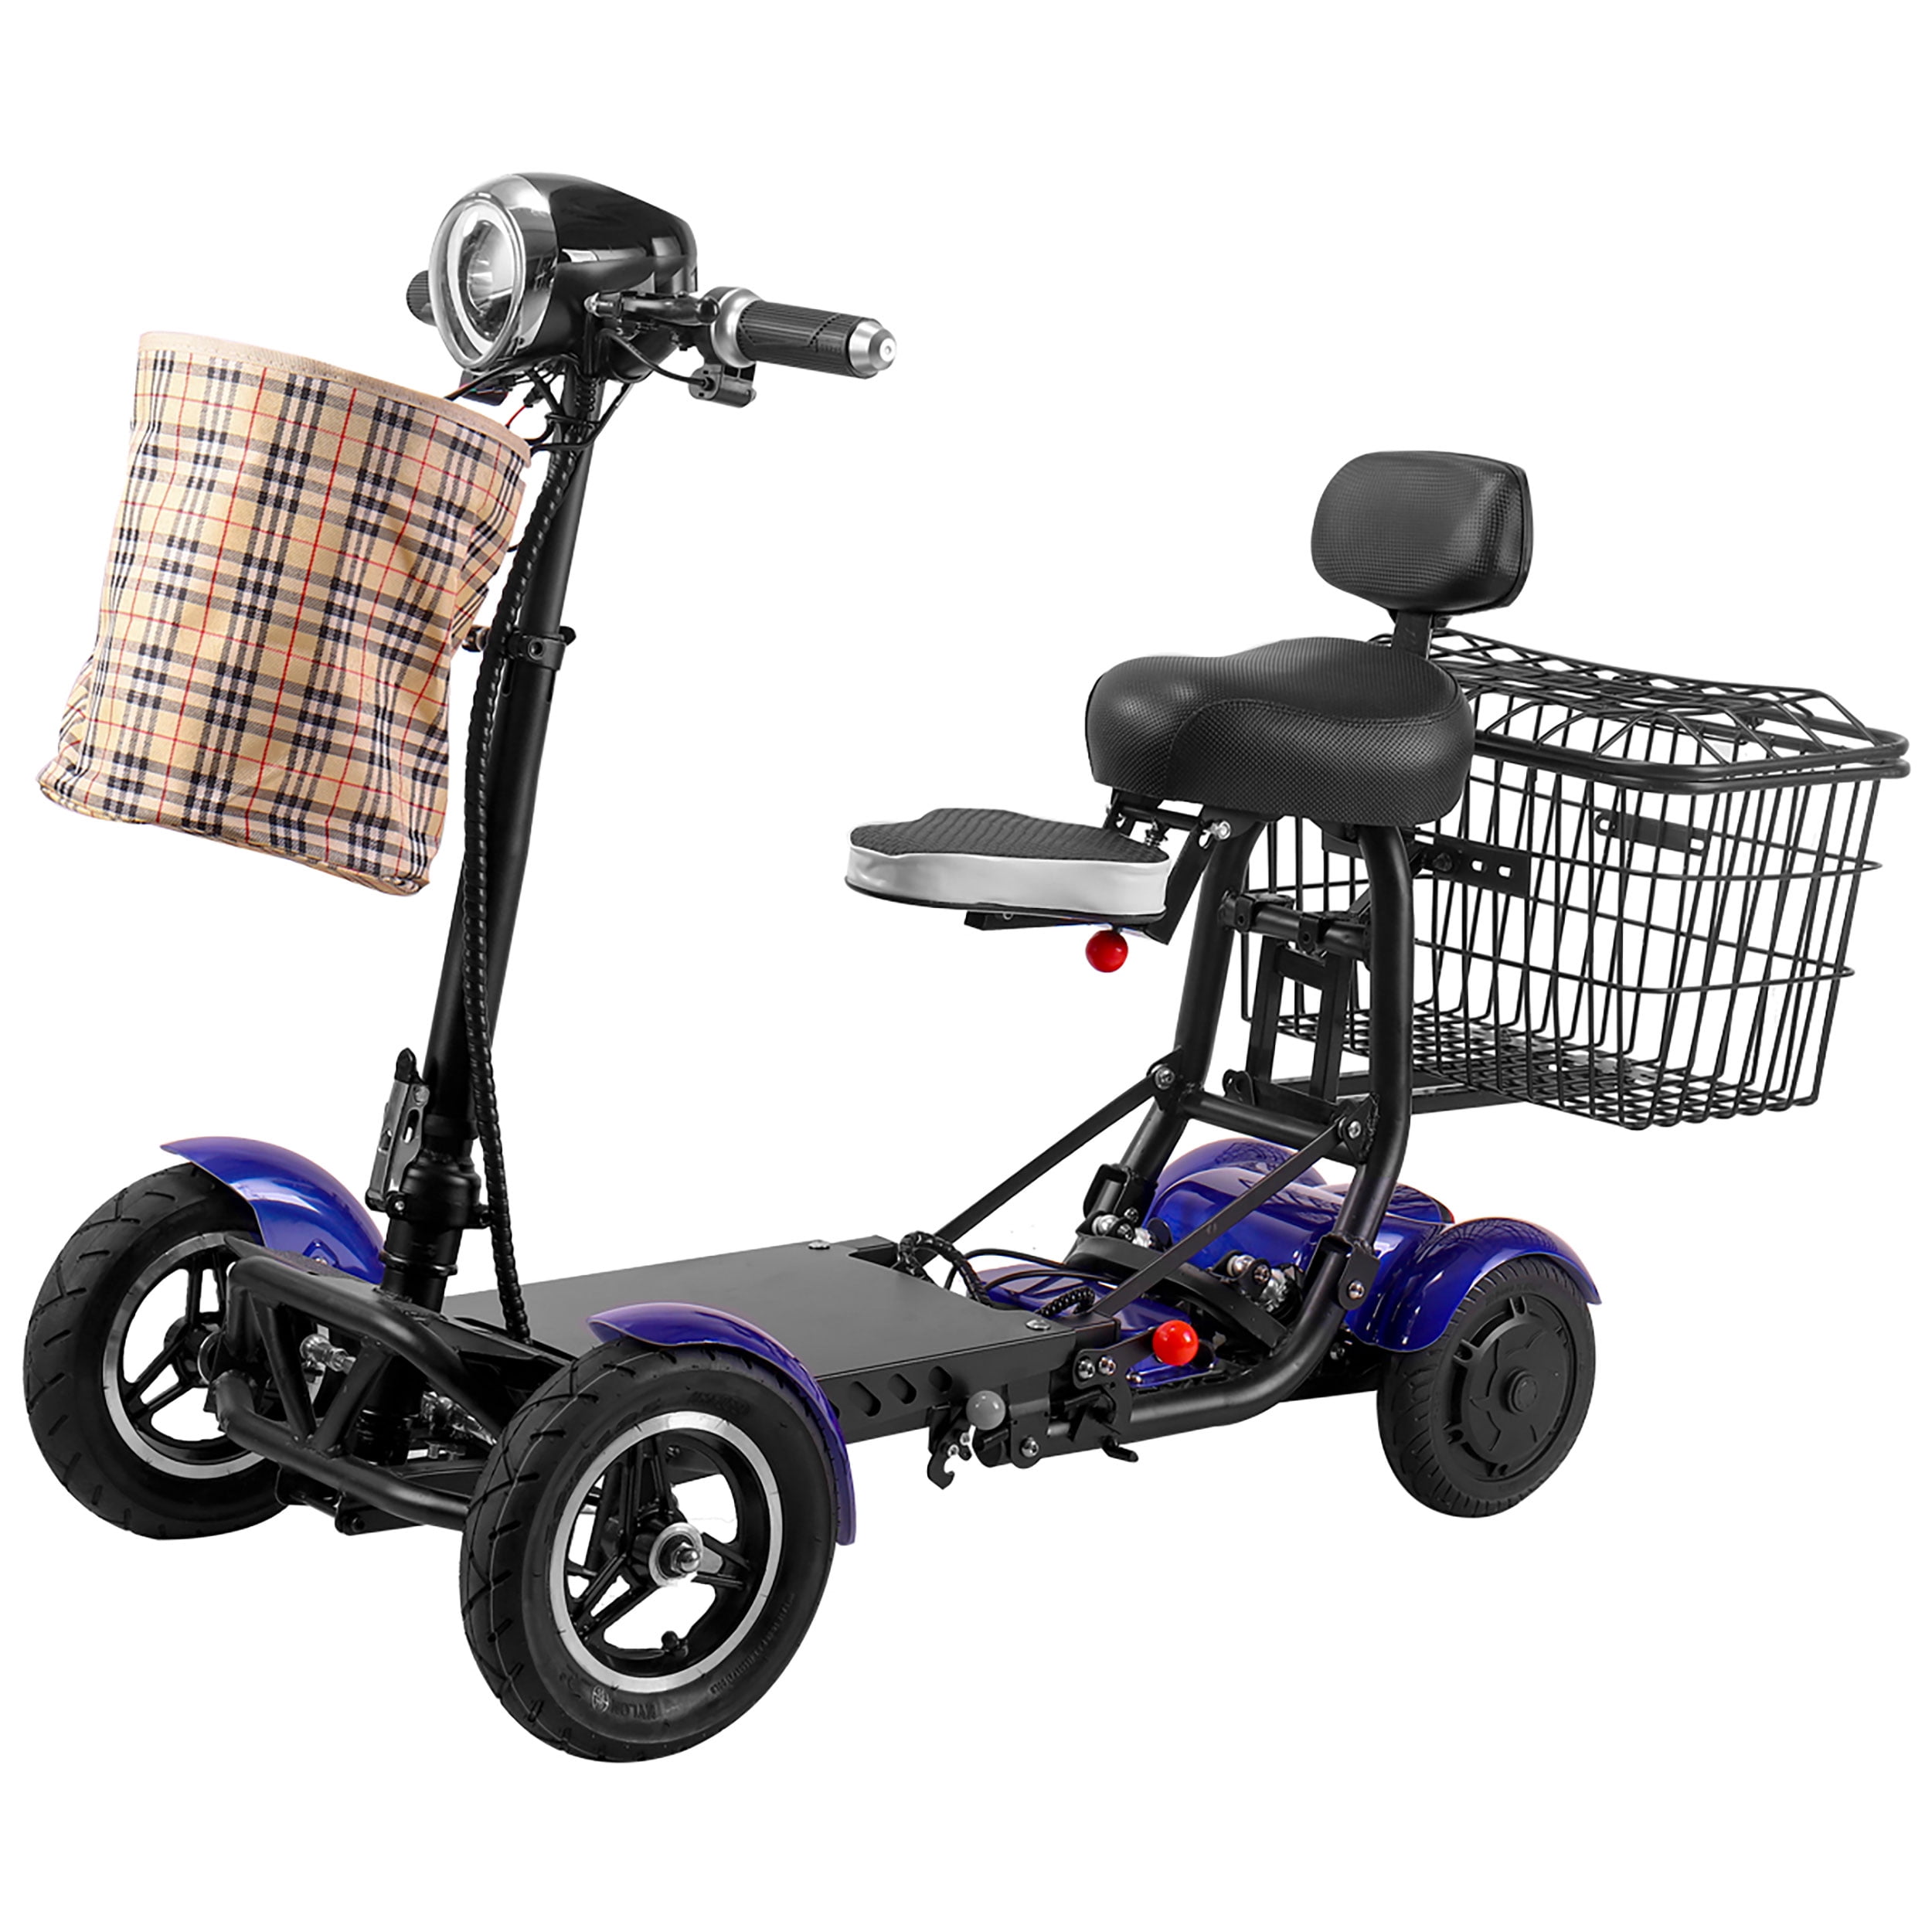 Foldable Portable Electric Scooter for Seniors with a Seat - Walmart.com